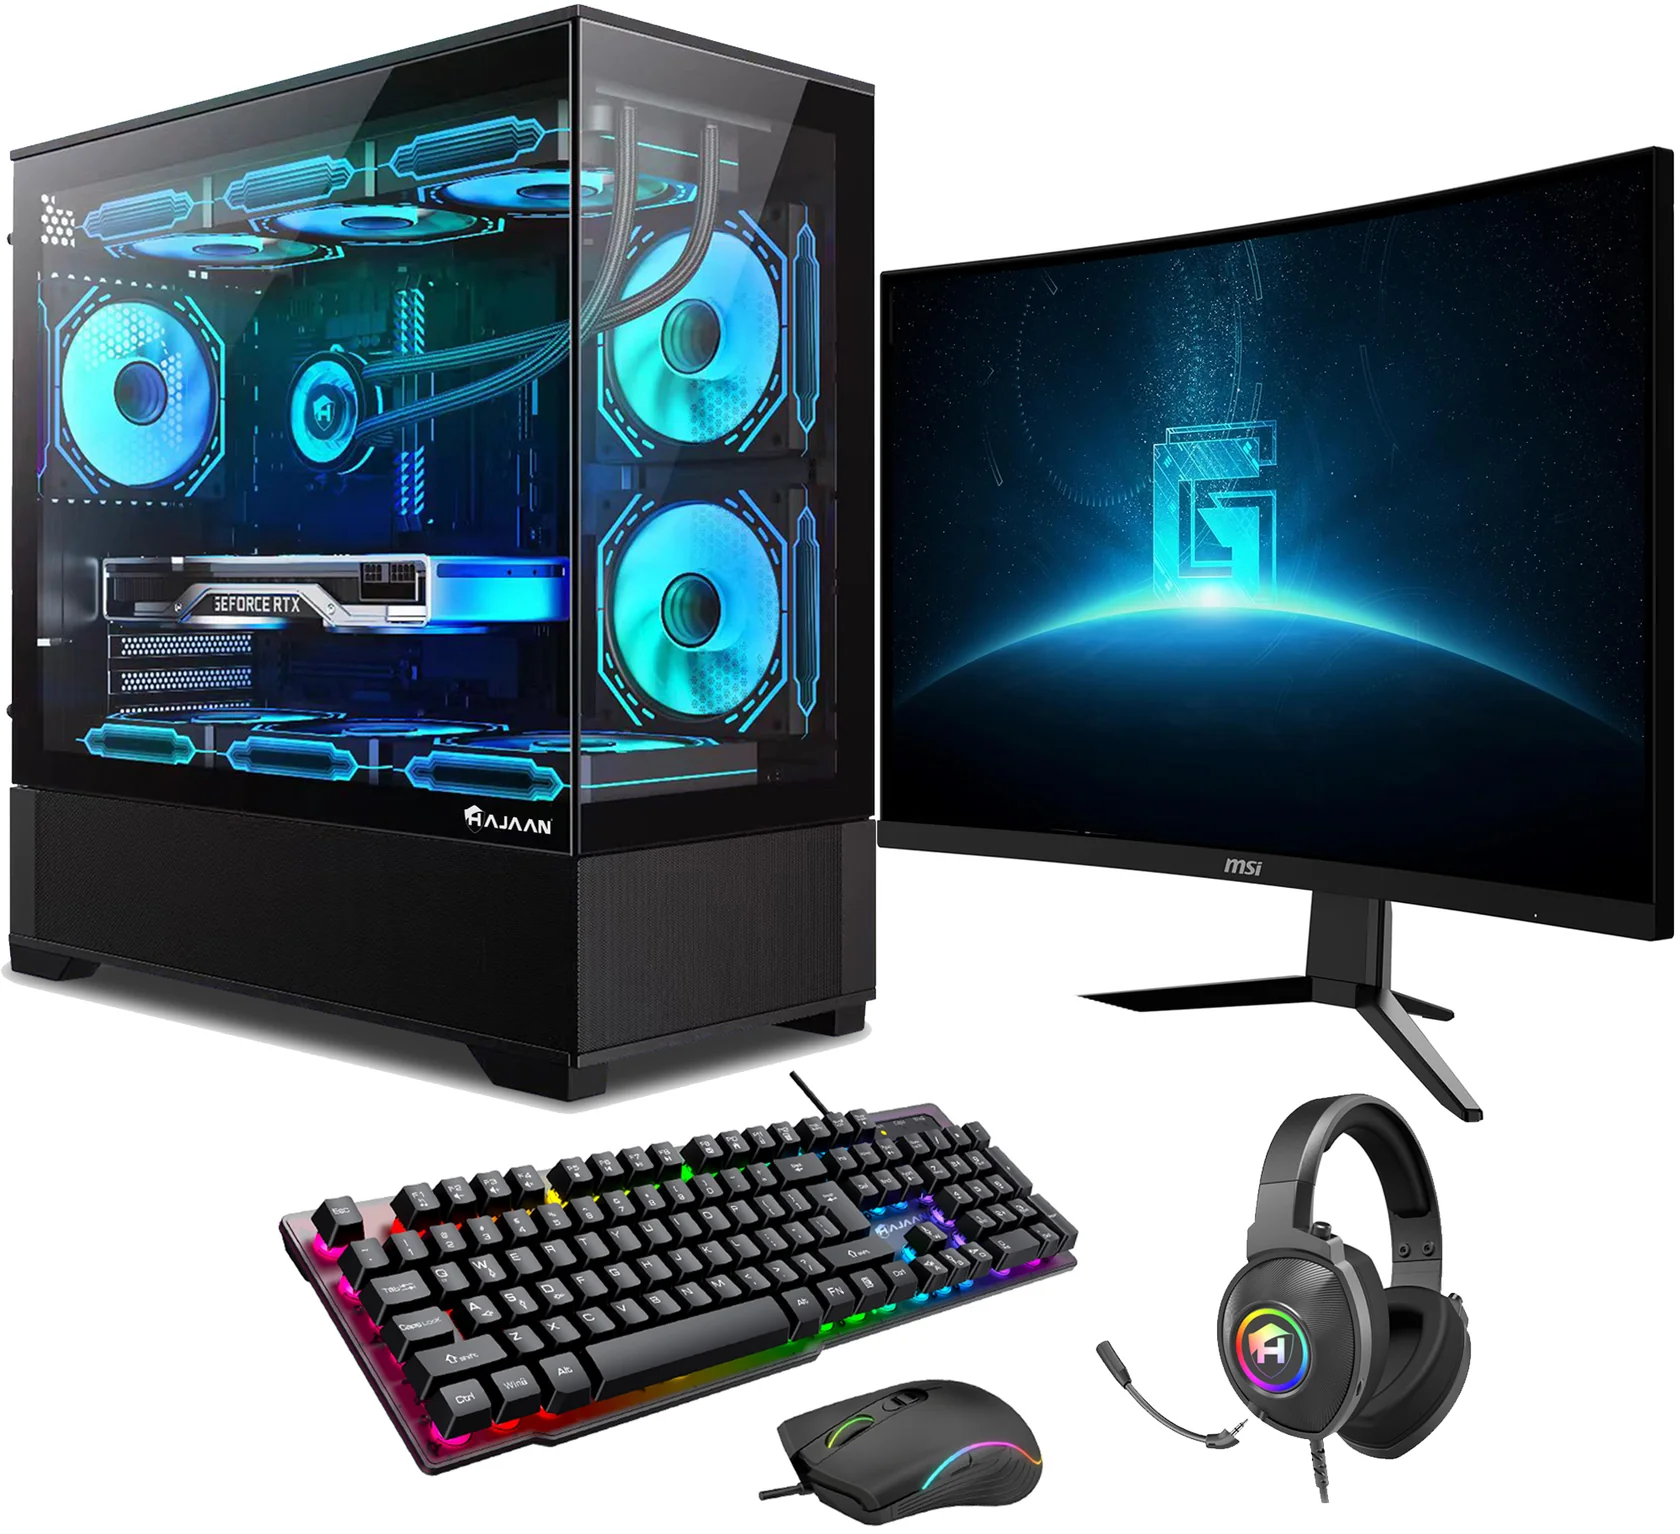 HAJAAN Gaming PC Tower Desktop with MSI 27-inch Curved Gaming Monitor Combo